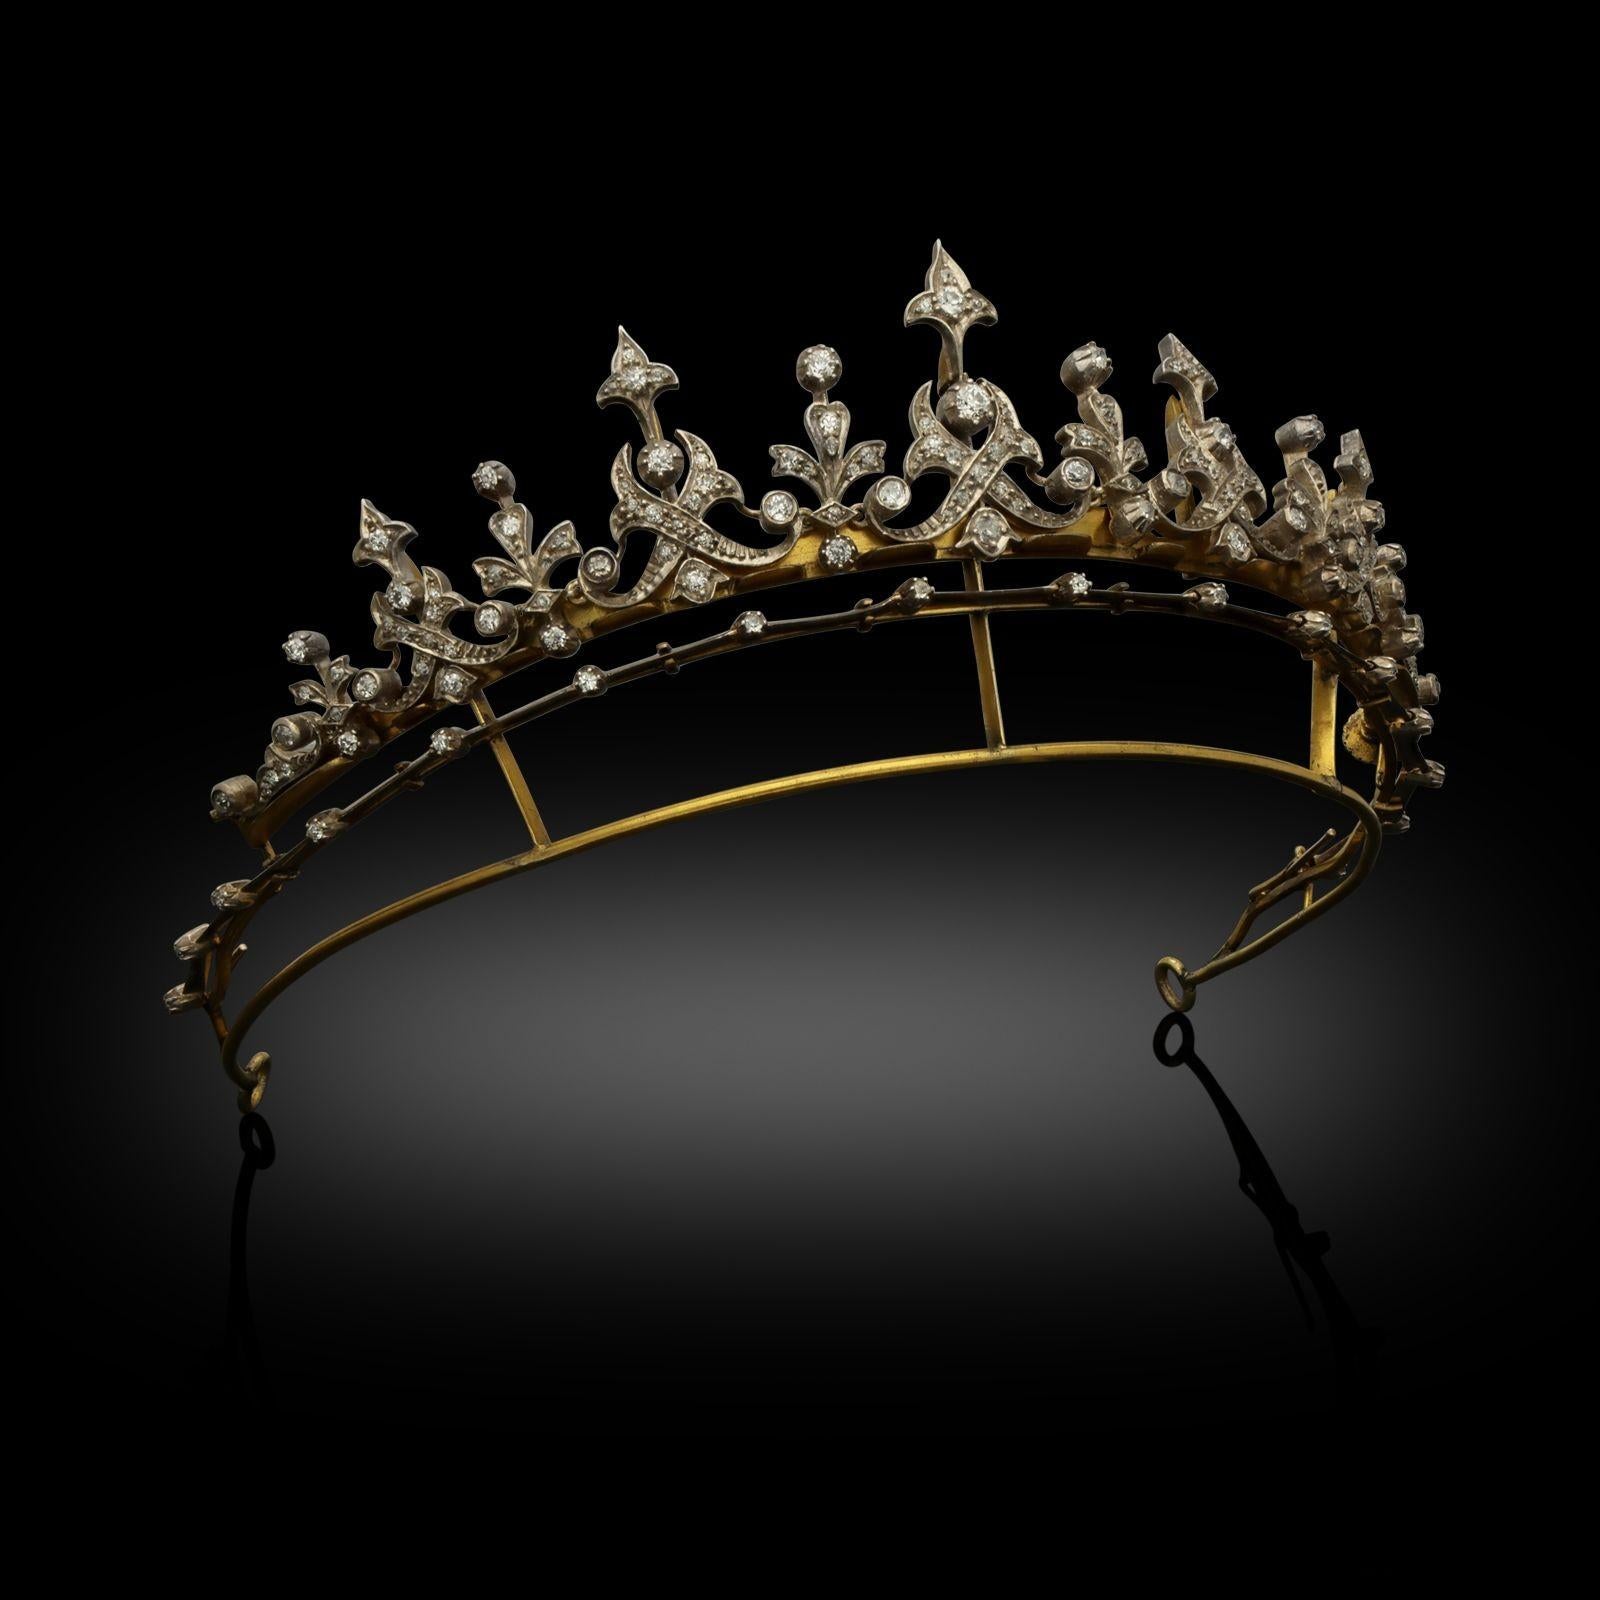 A beautiful Victorian diamond tiara convertible to a necklace c.1880s, the tiara formed of a graduated row of eleven fringe spires of foliate and scroll design with fleur-de-lys details, set throughout with old brilliant cut diamonds, the spires of